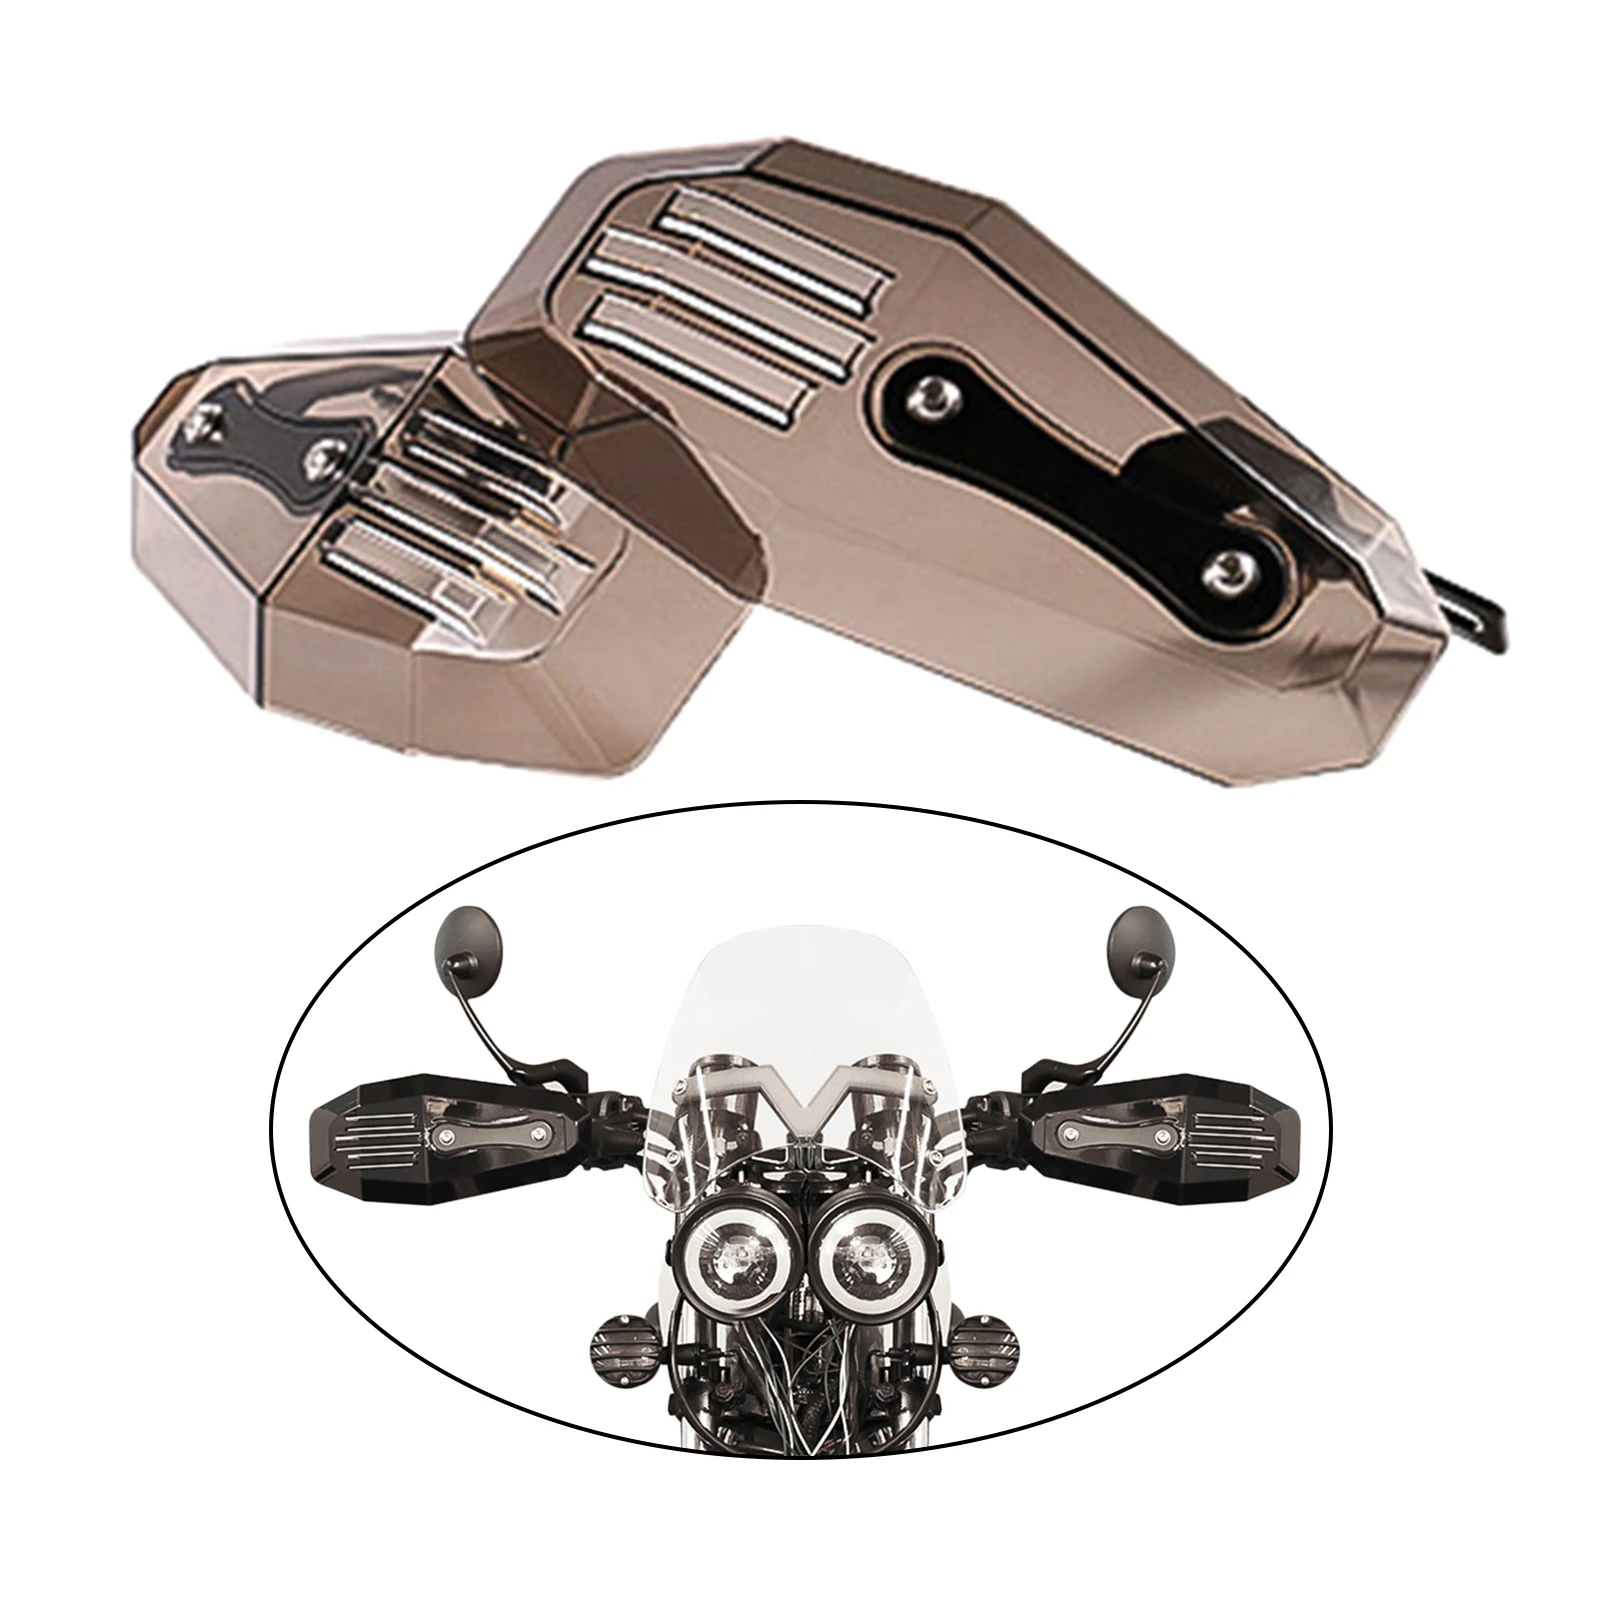 2Pcs Universal Motorcycle Hand Guard Protector Shield for Most Motorbike Motocross Scooter Windproof Handlebar HandGuards